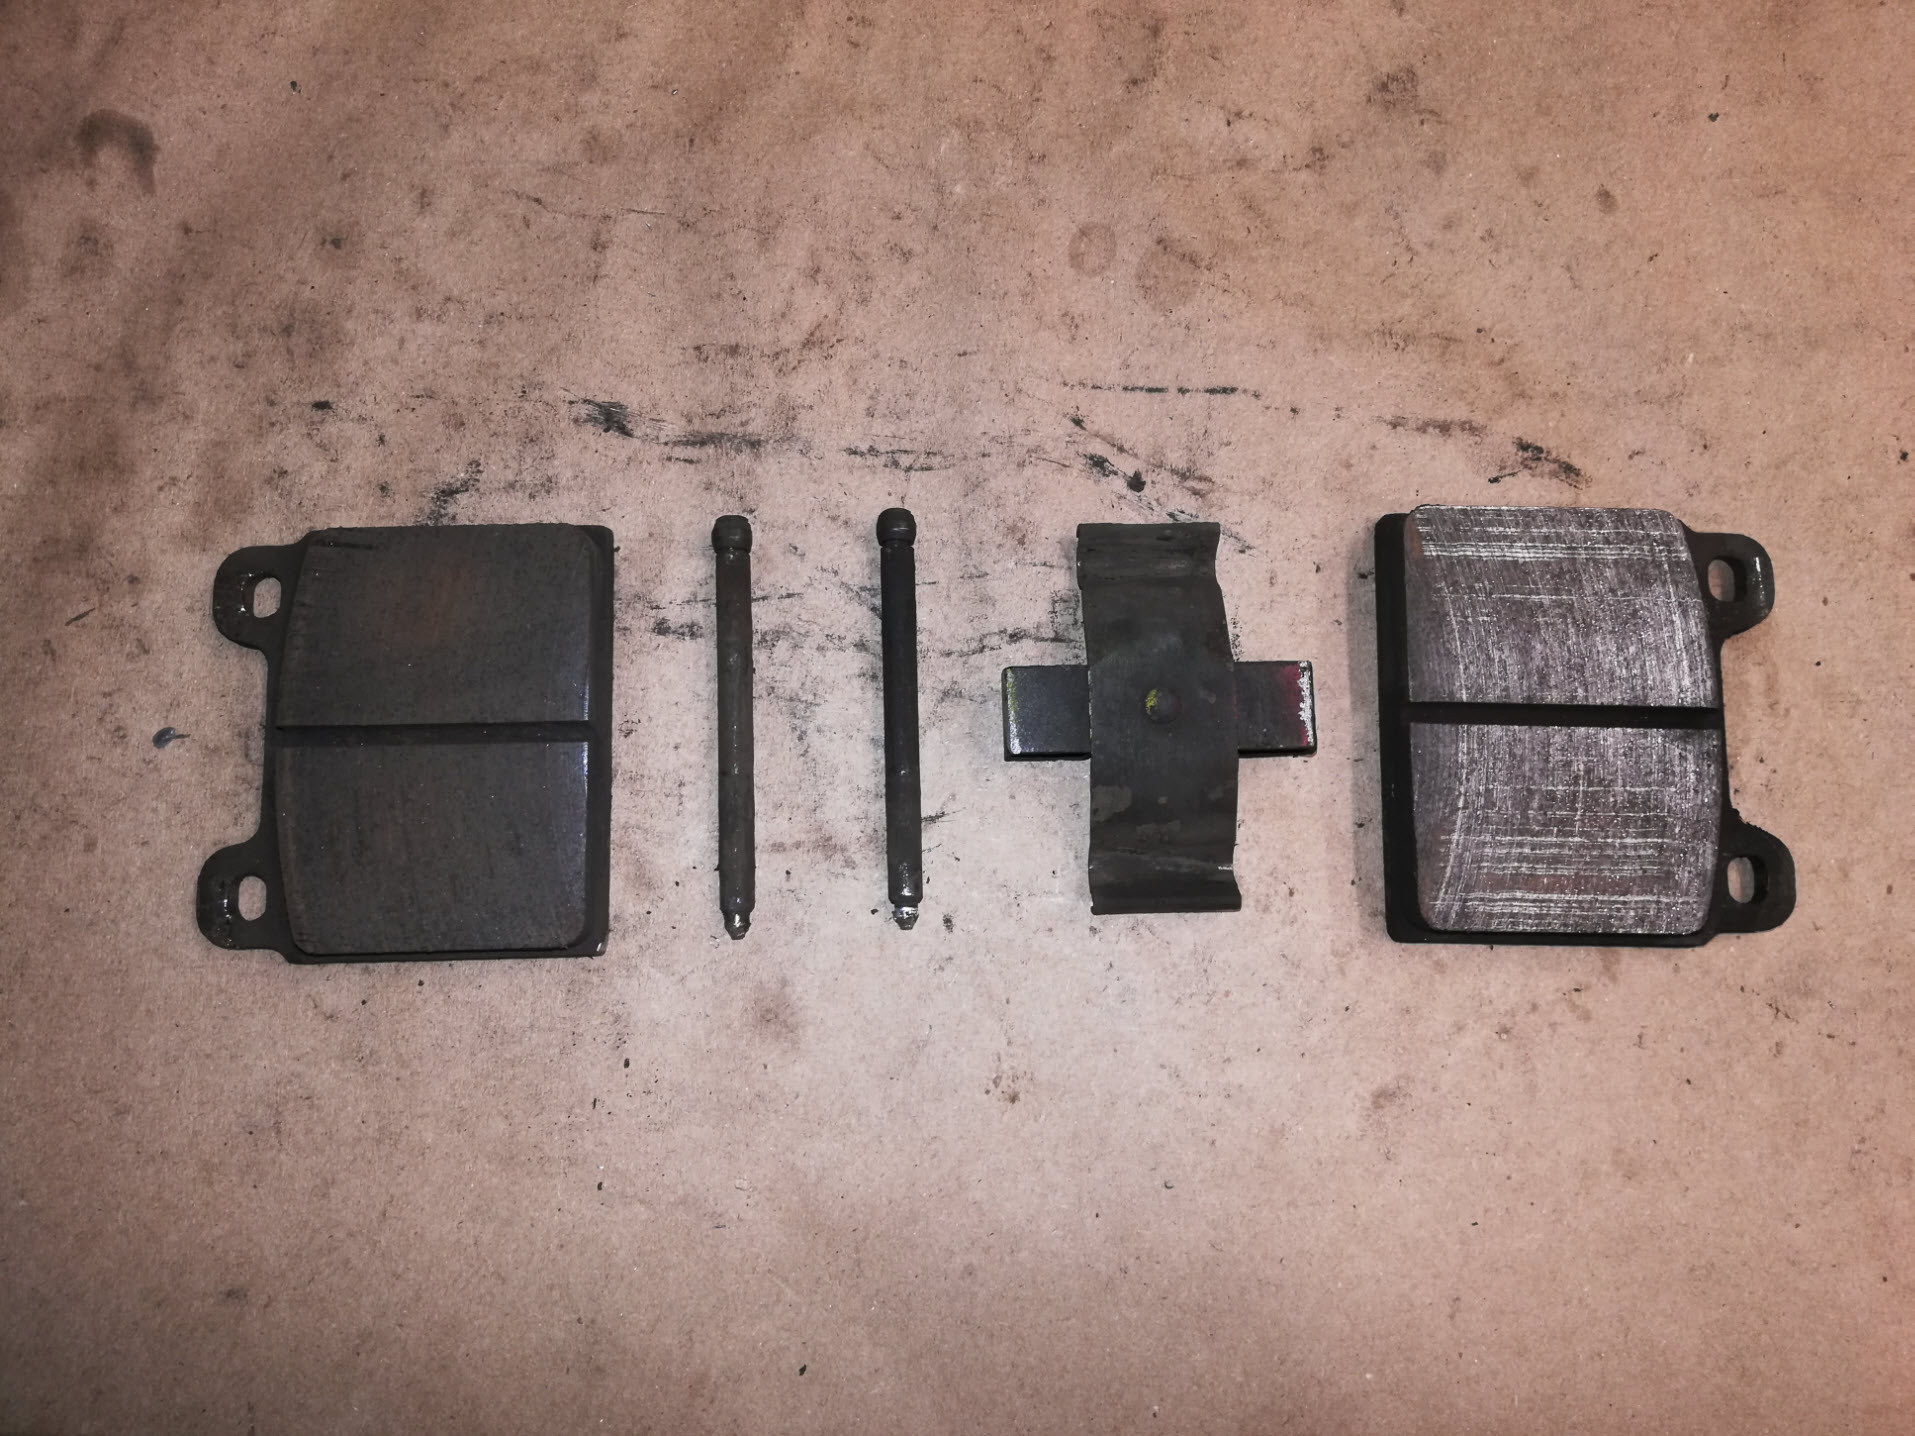 Air-cooled Porsche 911 brake pads and retaining hardware.